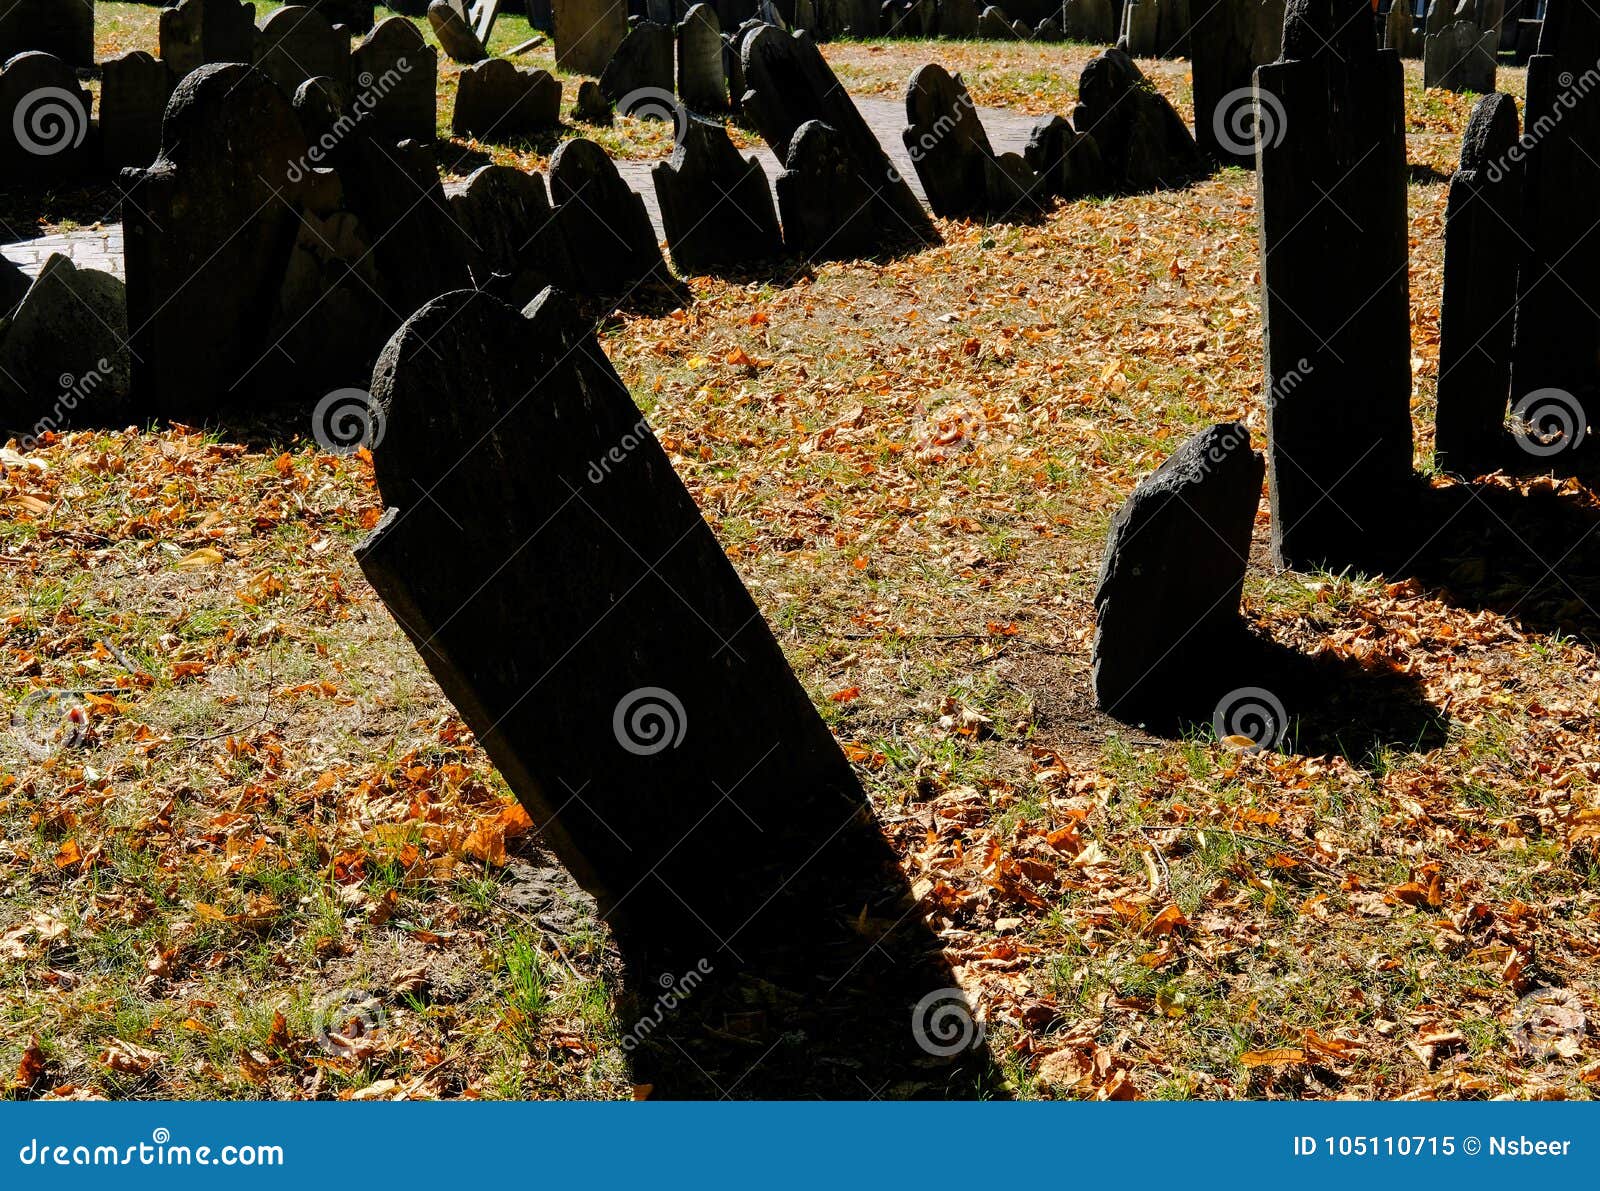 high contrast image of american war of independence graves seen in a famous boston cemetery.